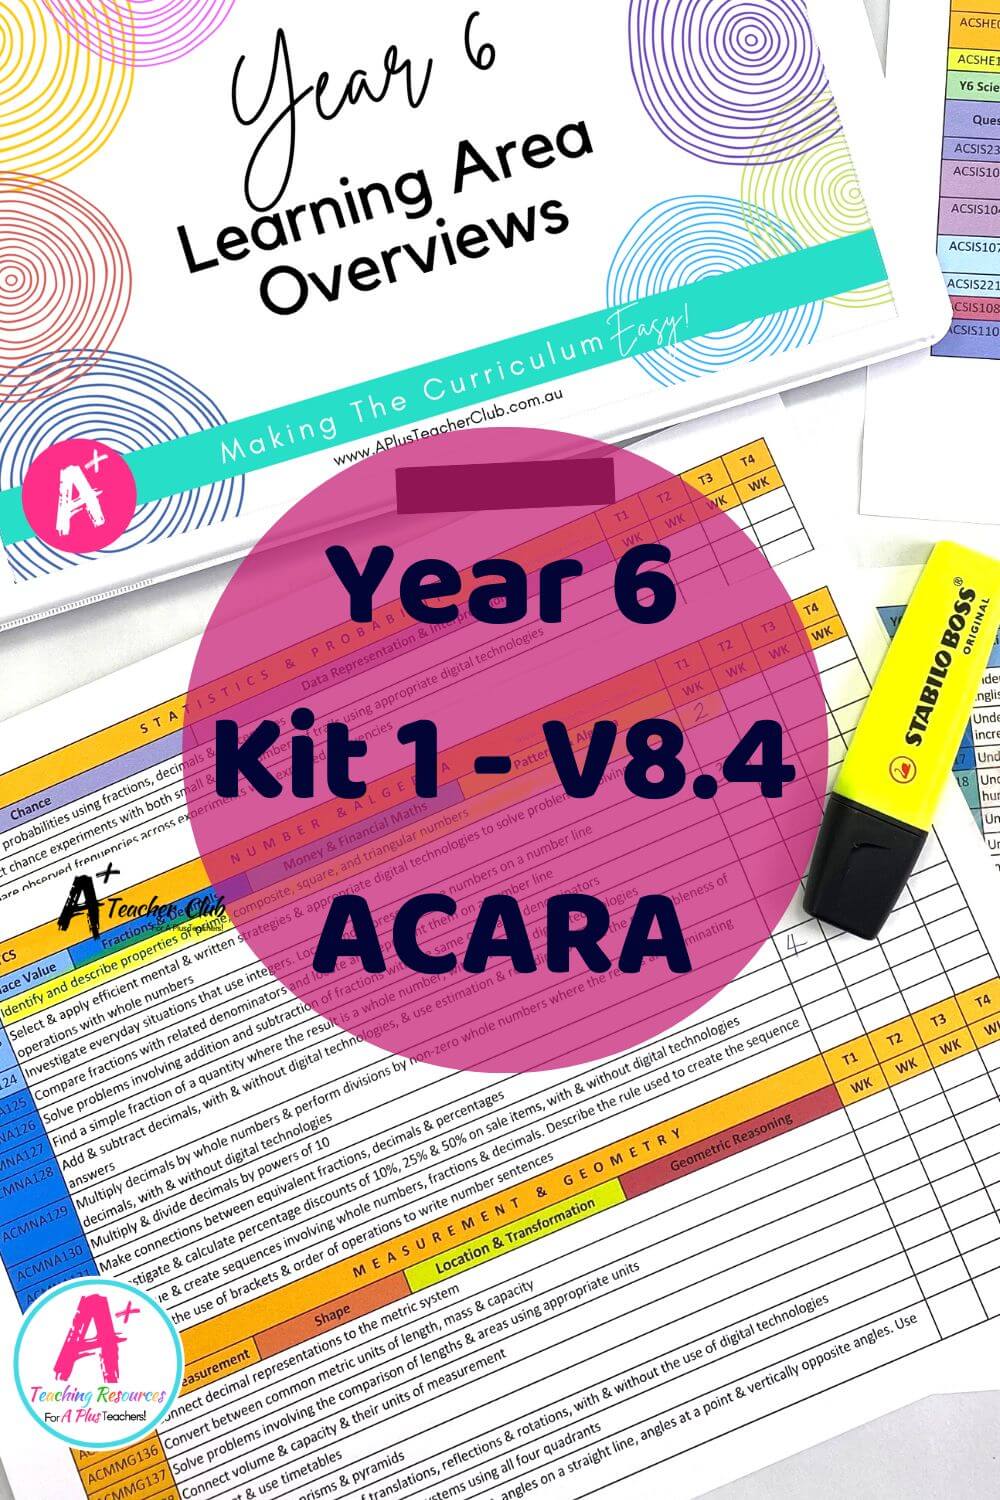 Year 6 Forward Planning Curriculum Overview ACARA V8.4